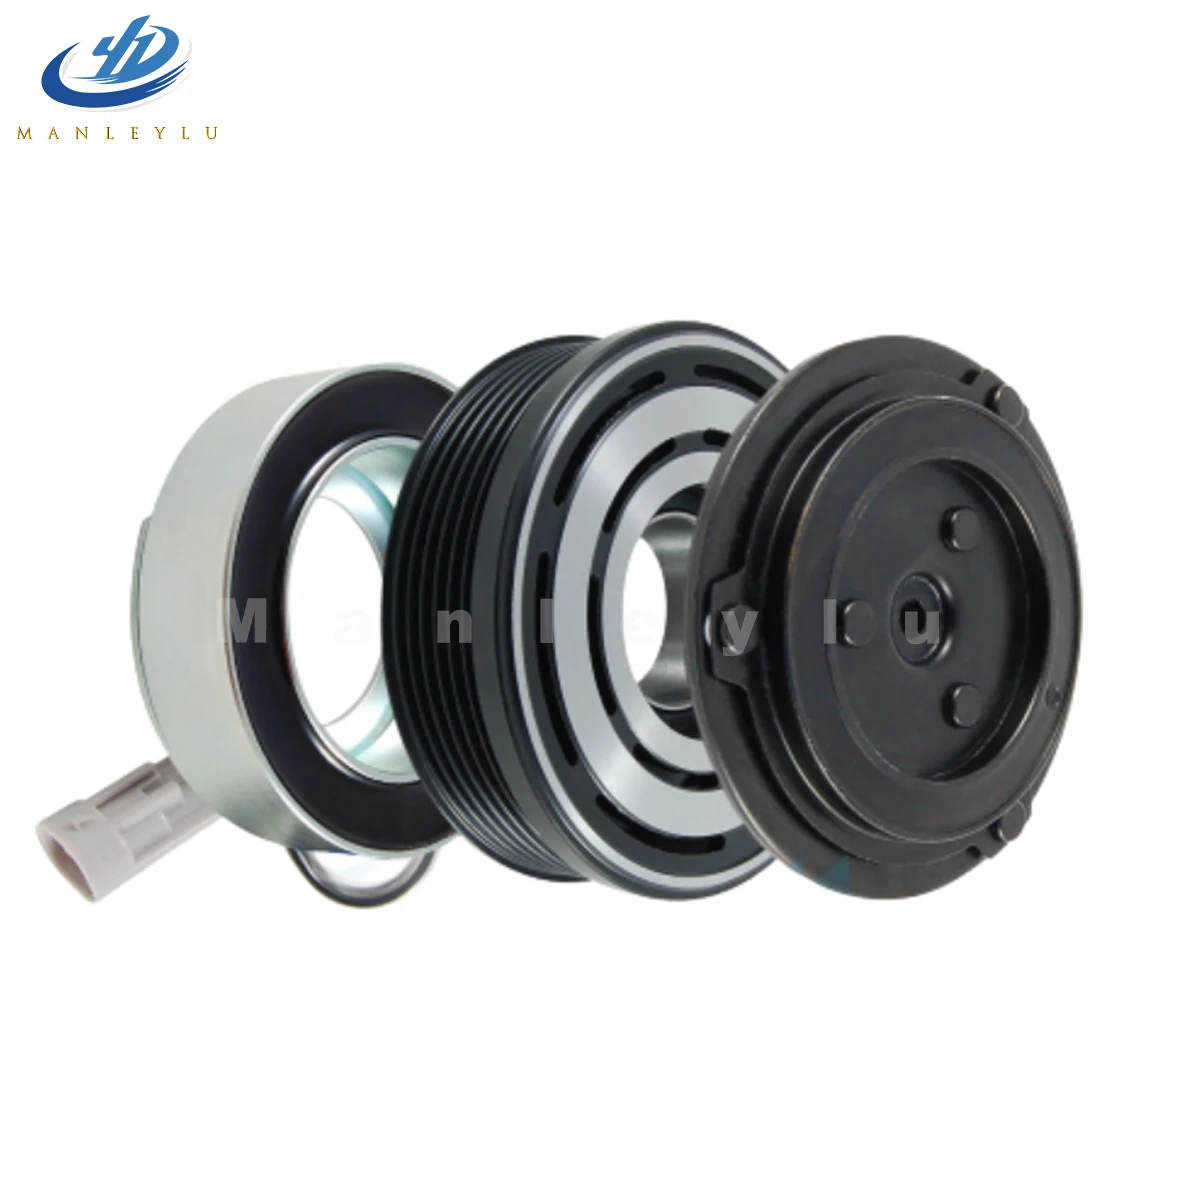 

A/C Air Conditioning Compressor Clutch Pulley For OPEL ASTRA H ZAFIRA B CDTI RENAULT VAUXHALL 13124751 13286086 6854066 6854097